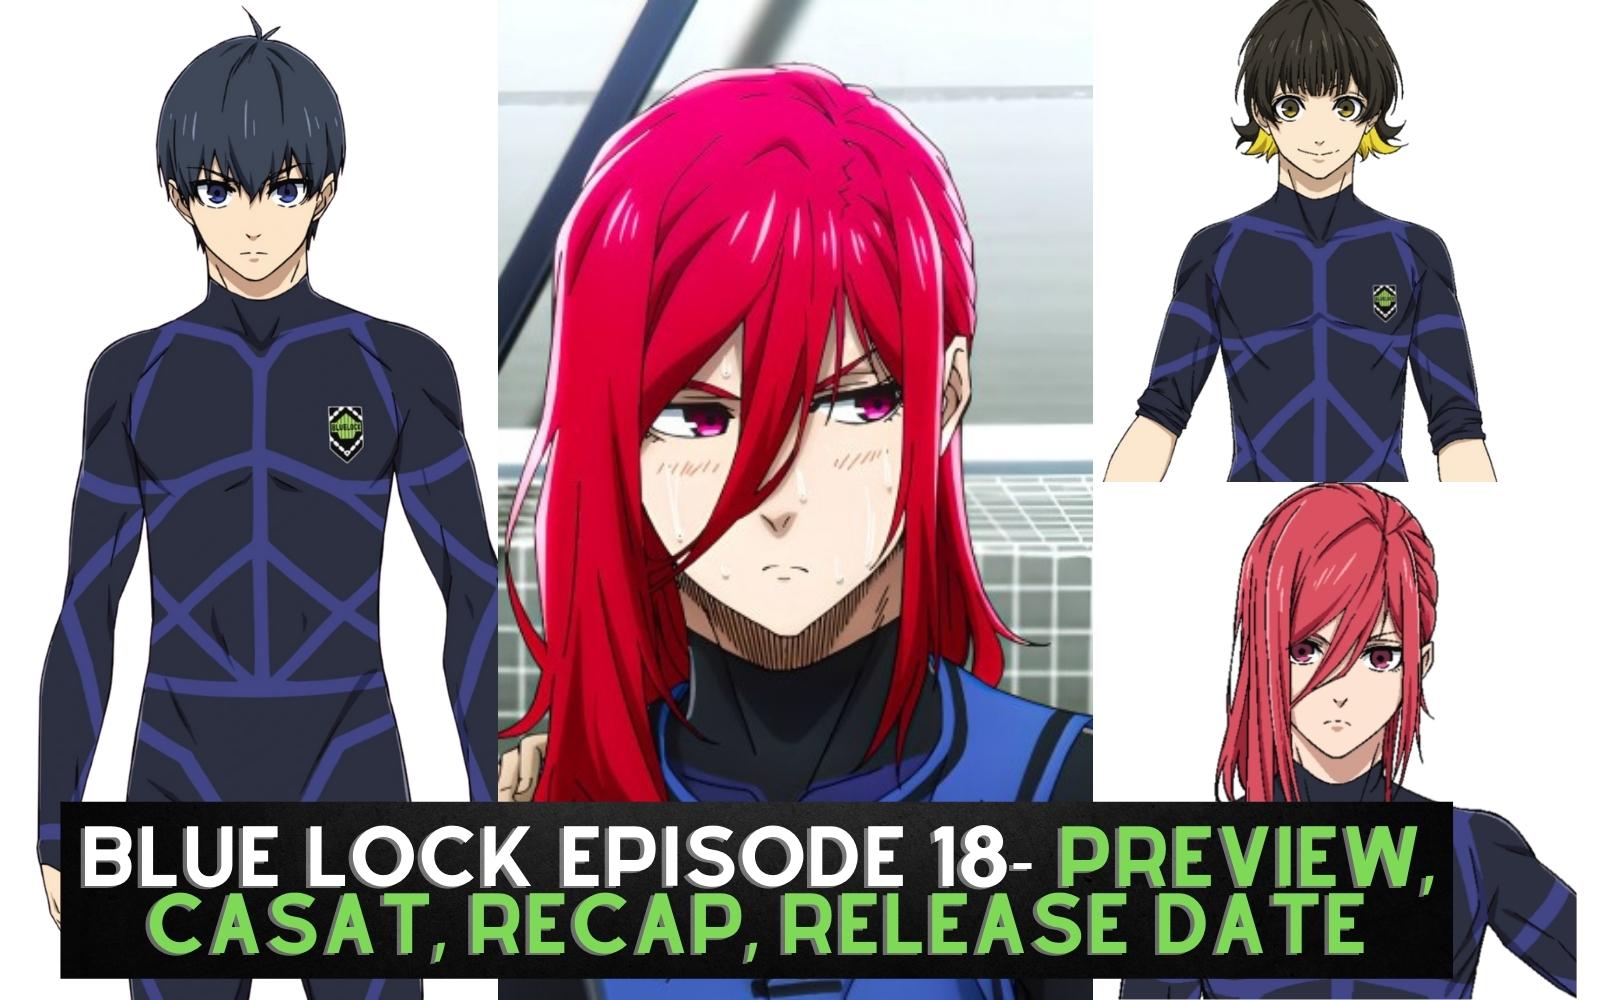 Blue Lock Episode 19- Preview, Spoilers, Trailer, Cast, Recap, Countdown, Release  Date & Where to Watch » Amazfeed